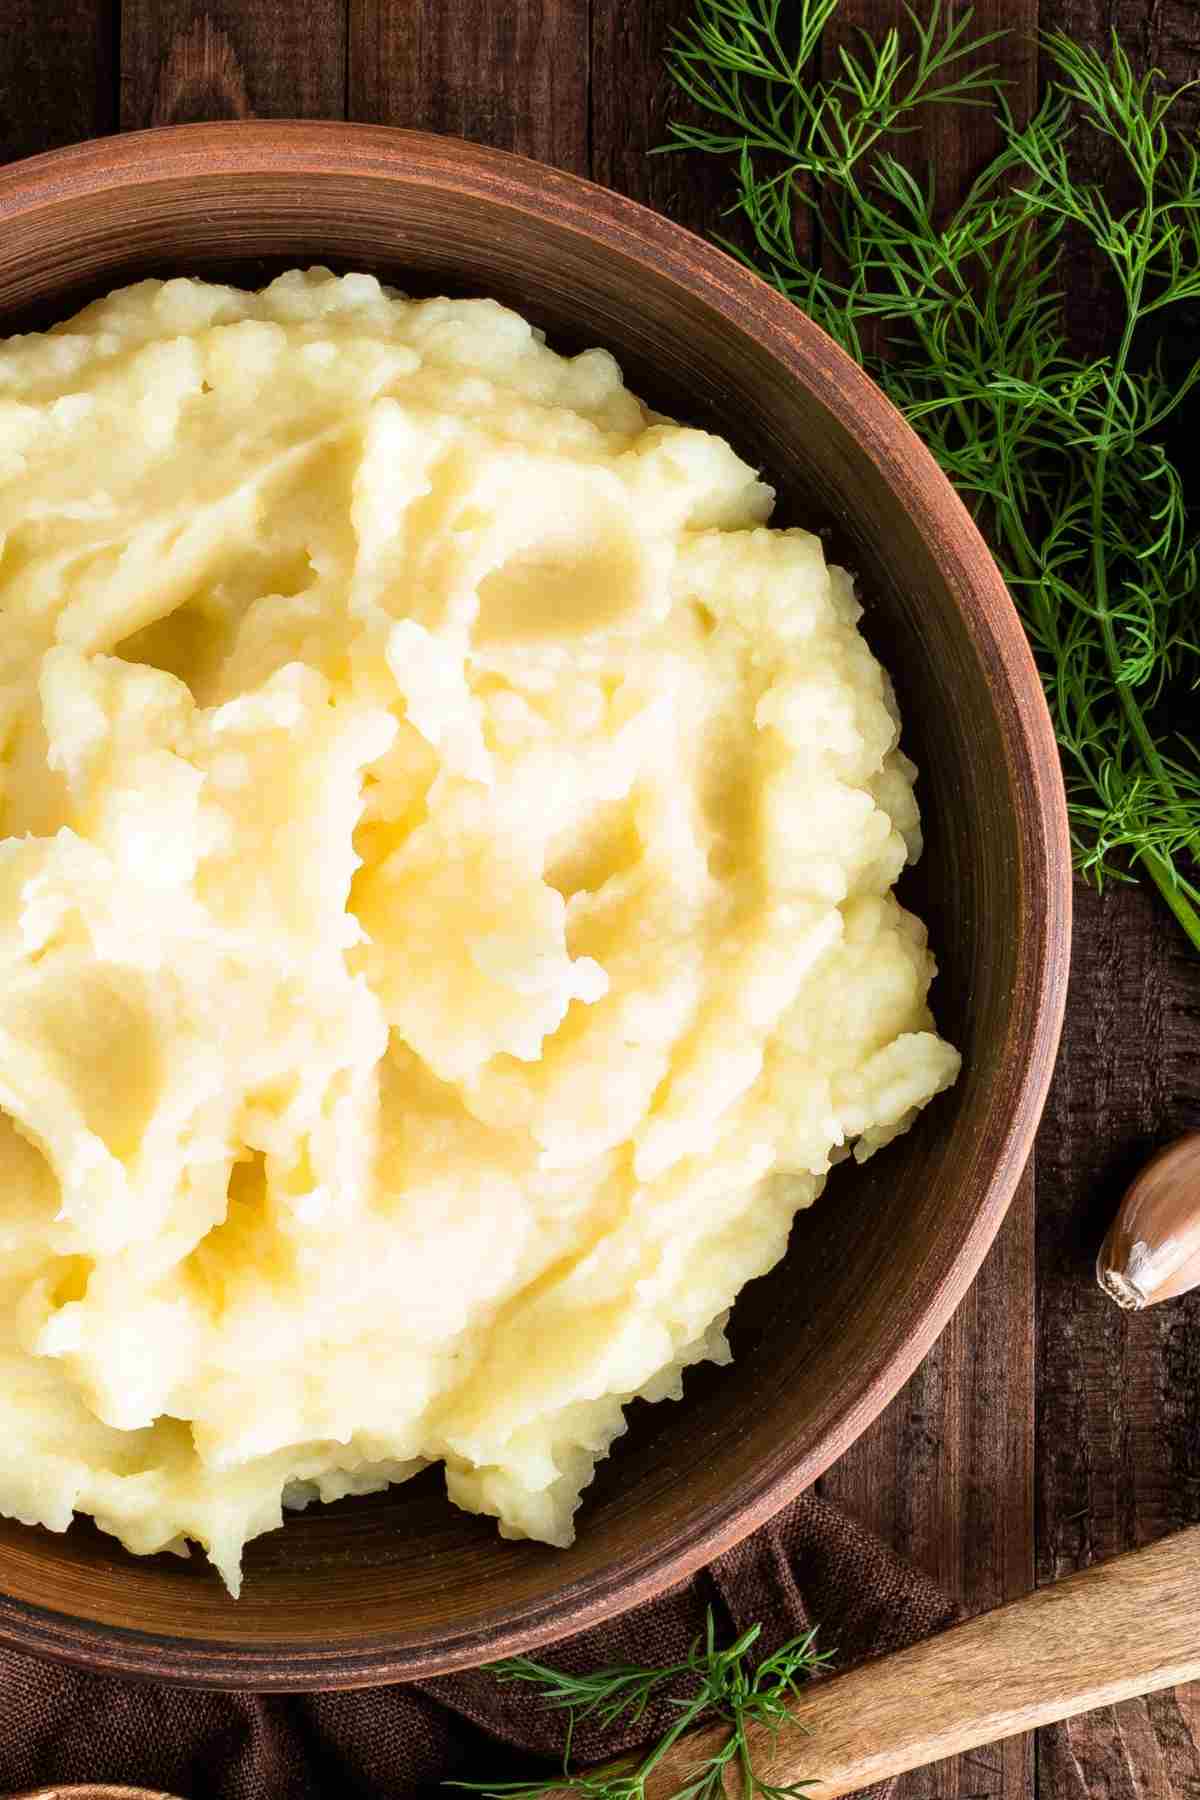 If you’re a fan of the mashed potatoes at Popeyes, this copycat recipe is just what you need. The mashed potatoes are light, fluffy, and full of delicious flavor.